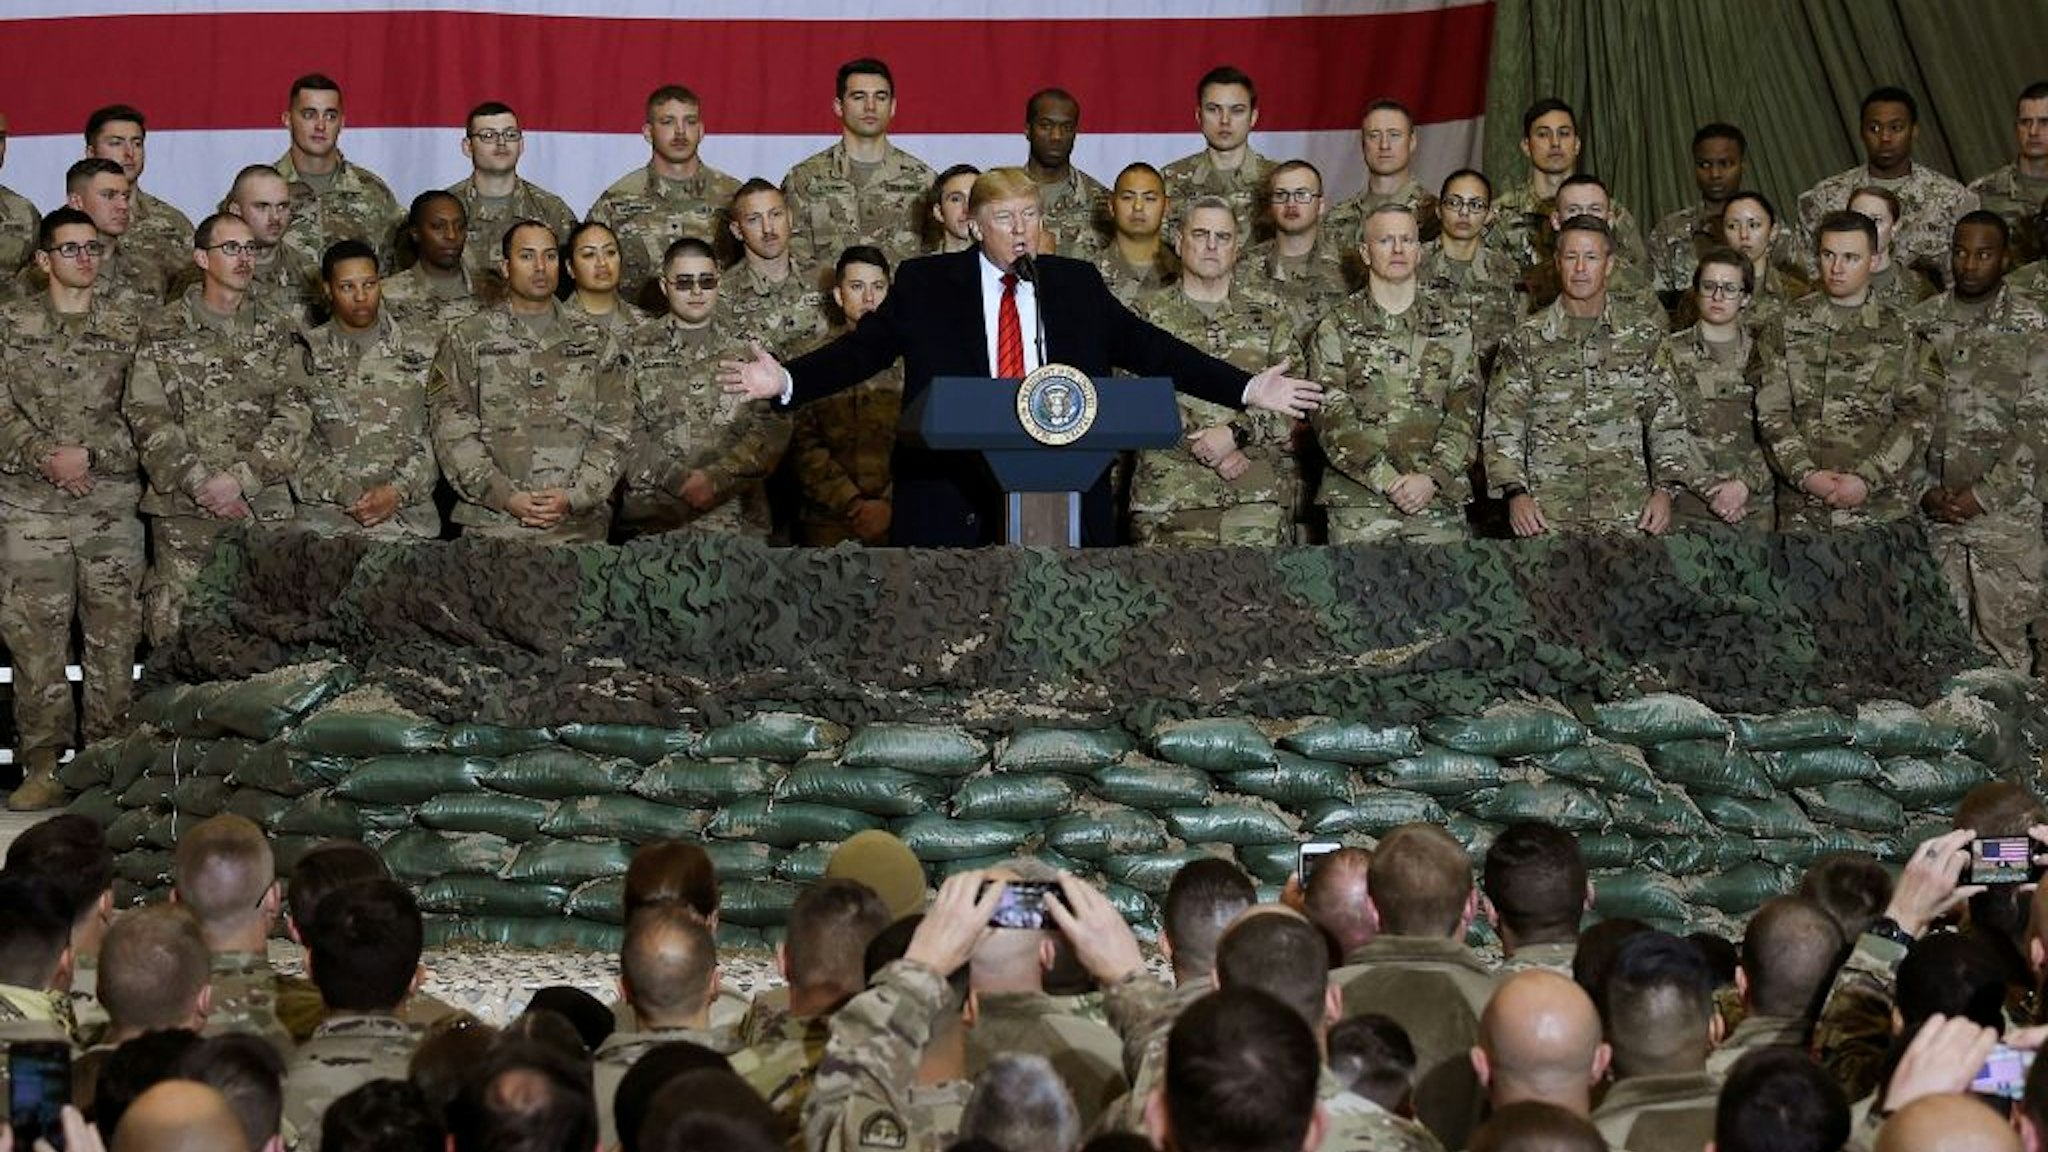 In this file photo taken on November 28, 2019, US President Donald Trump speaks to the troops during a surprise Thanksgiving day visit at Bagram Air Field in Afghanistan.